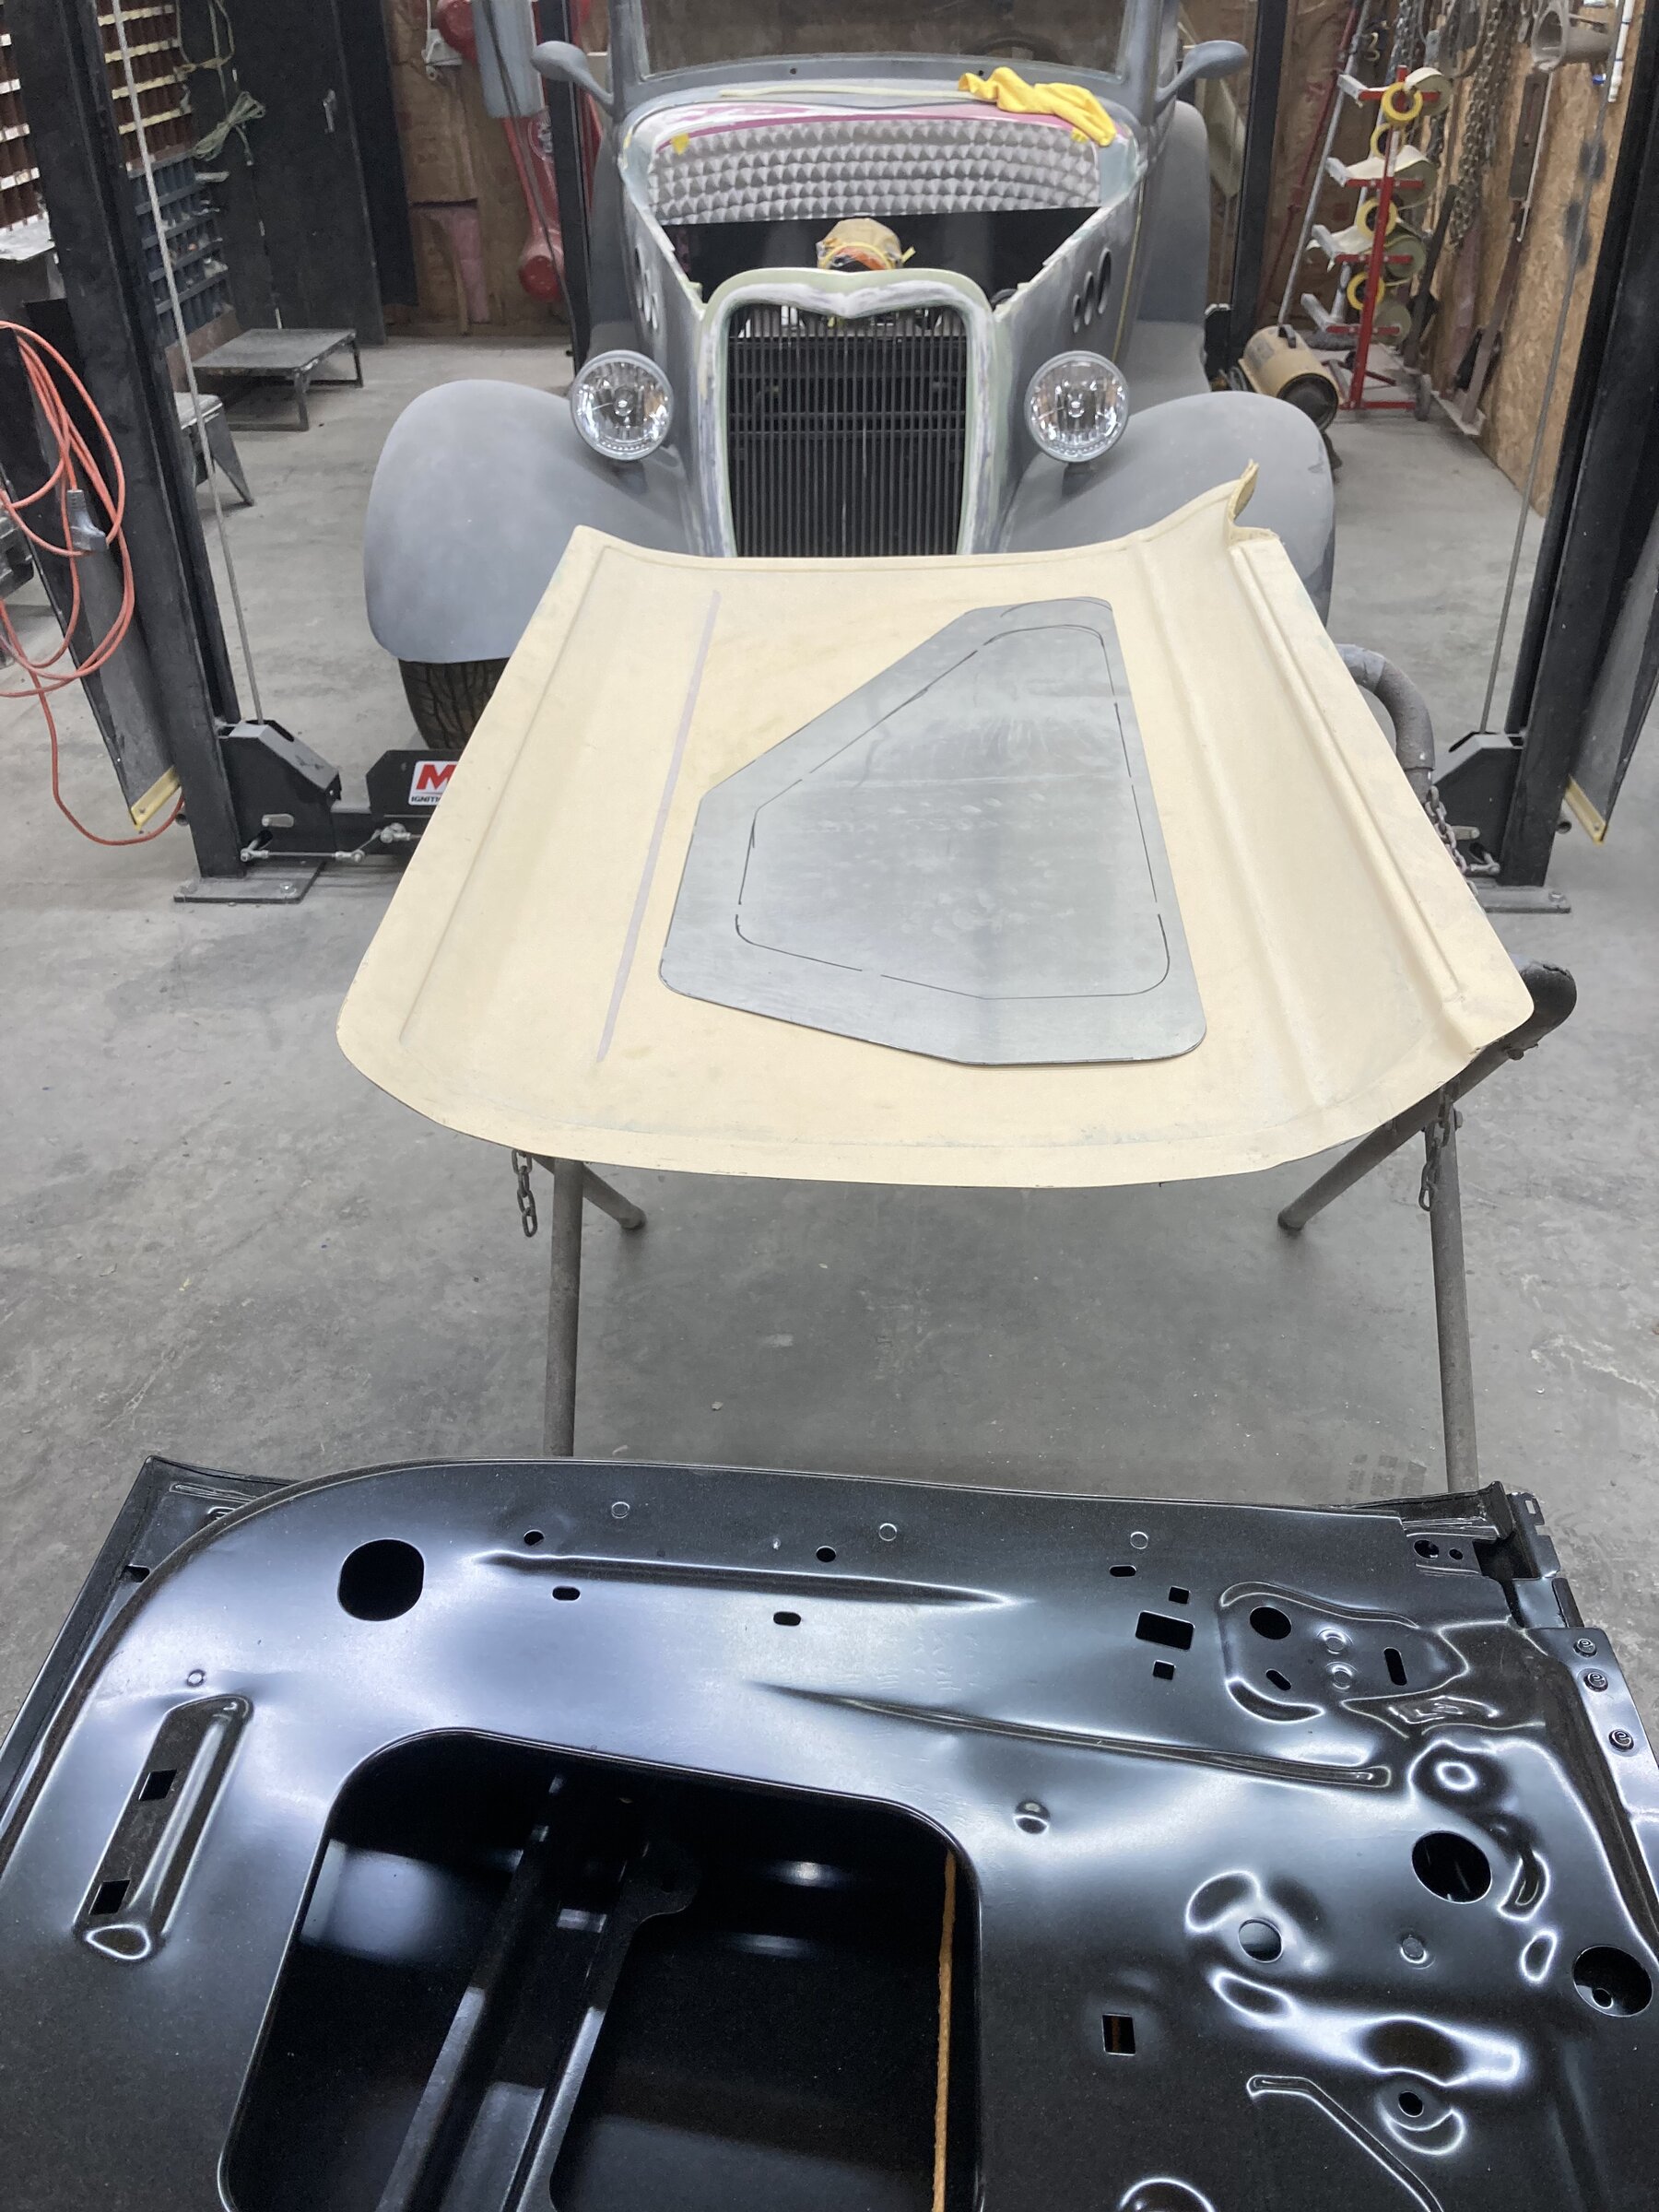 Ford Bronco Donut Doors are coming! 5C94B24C-8164-4C9A-A25F-F1B893452132